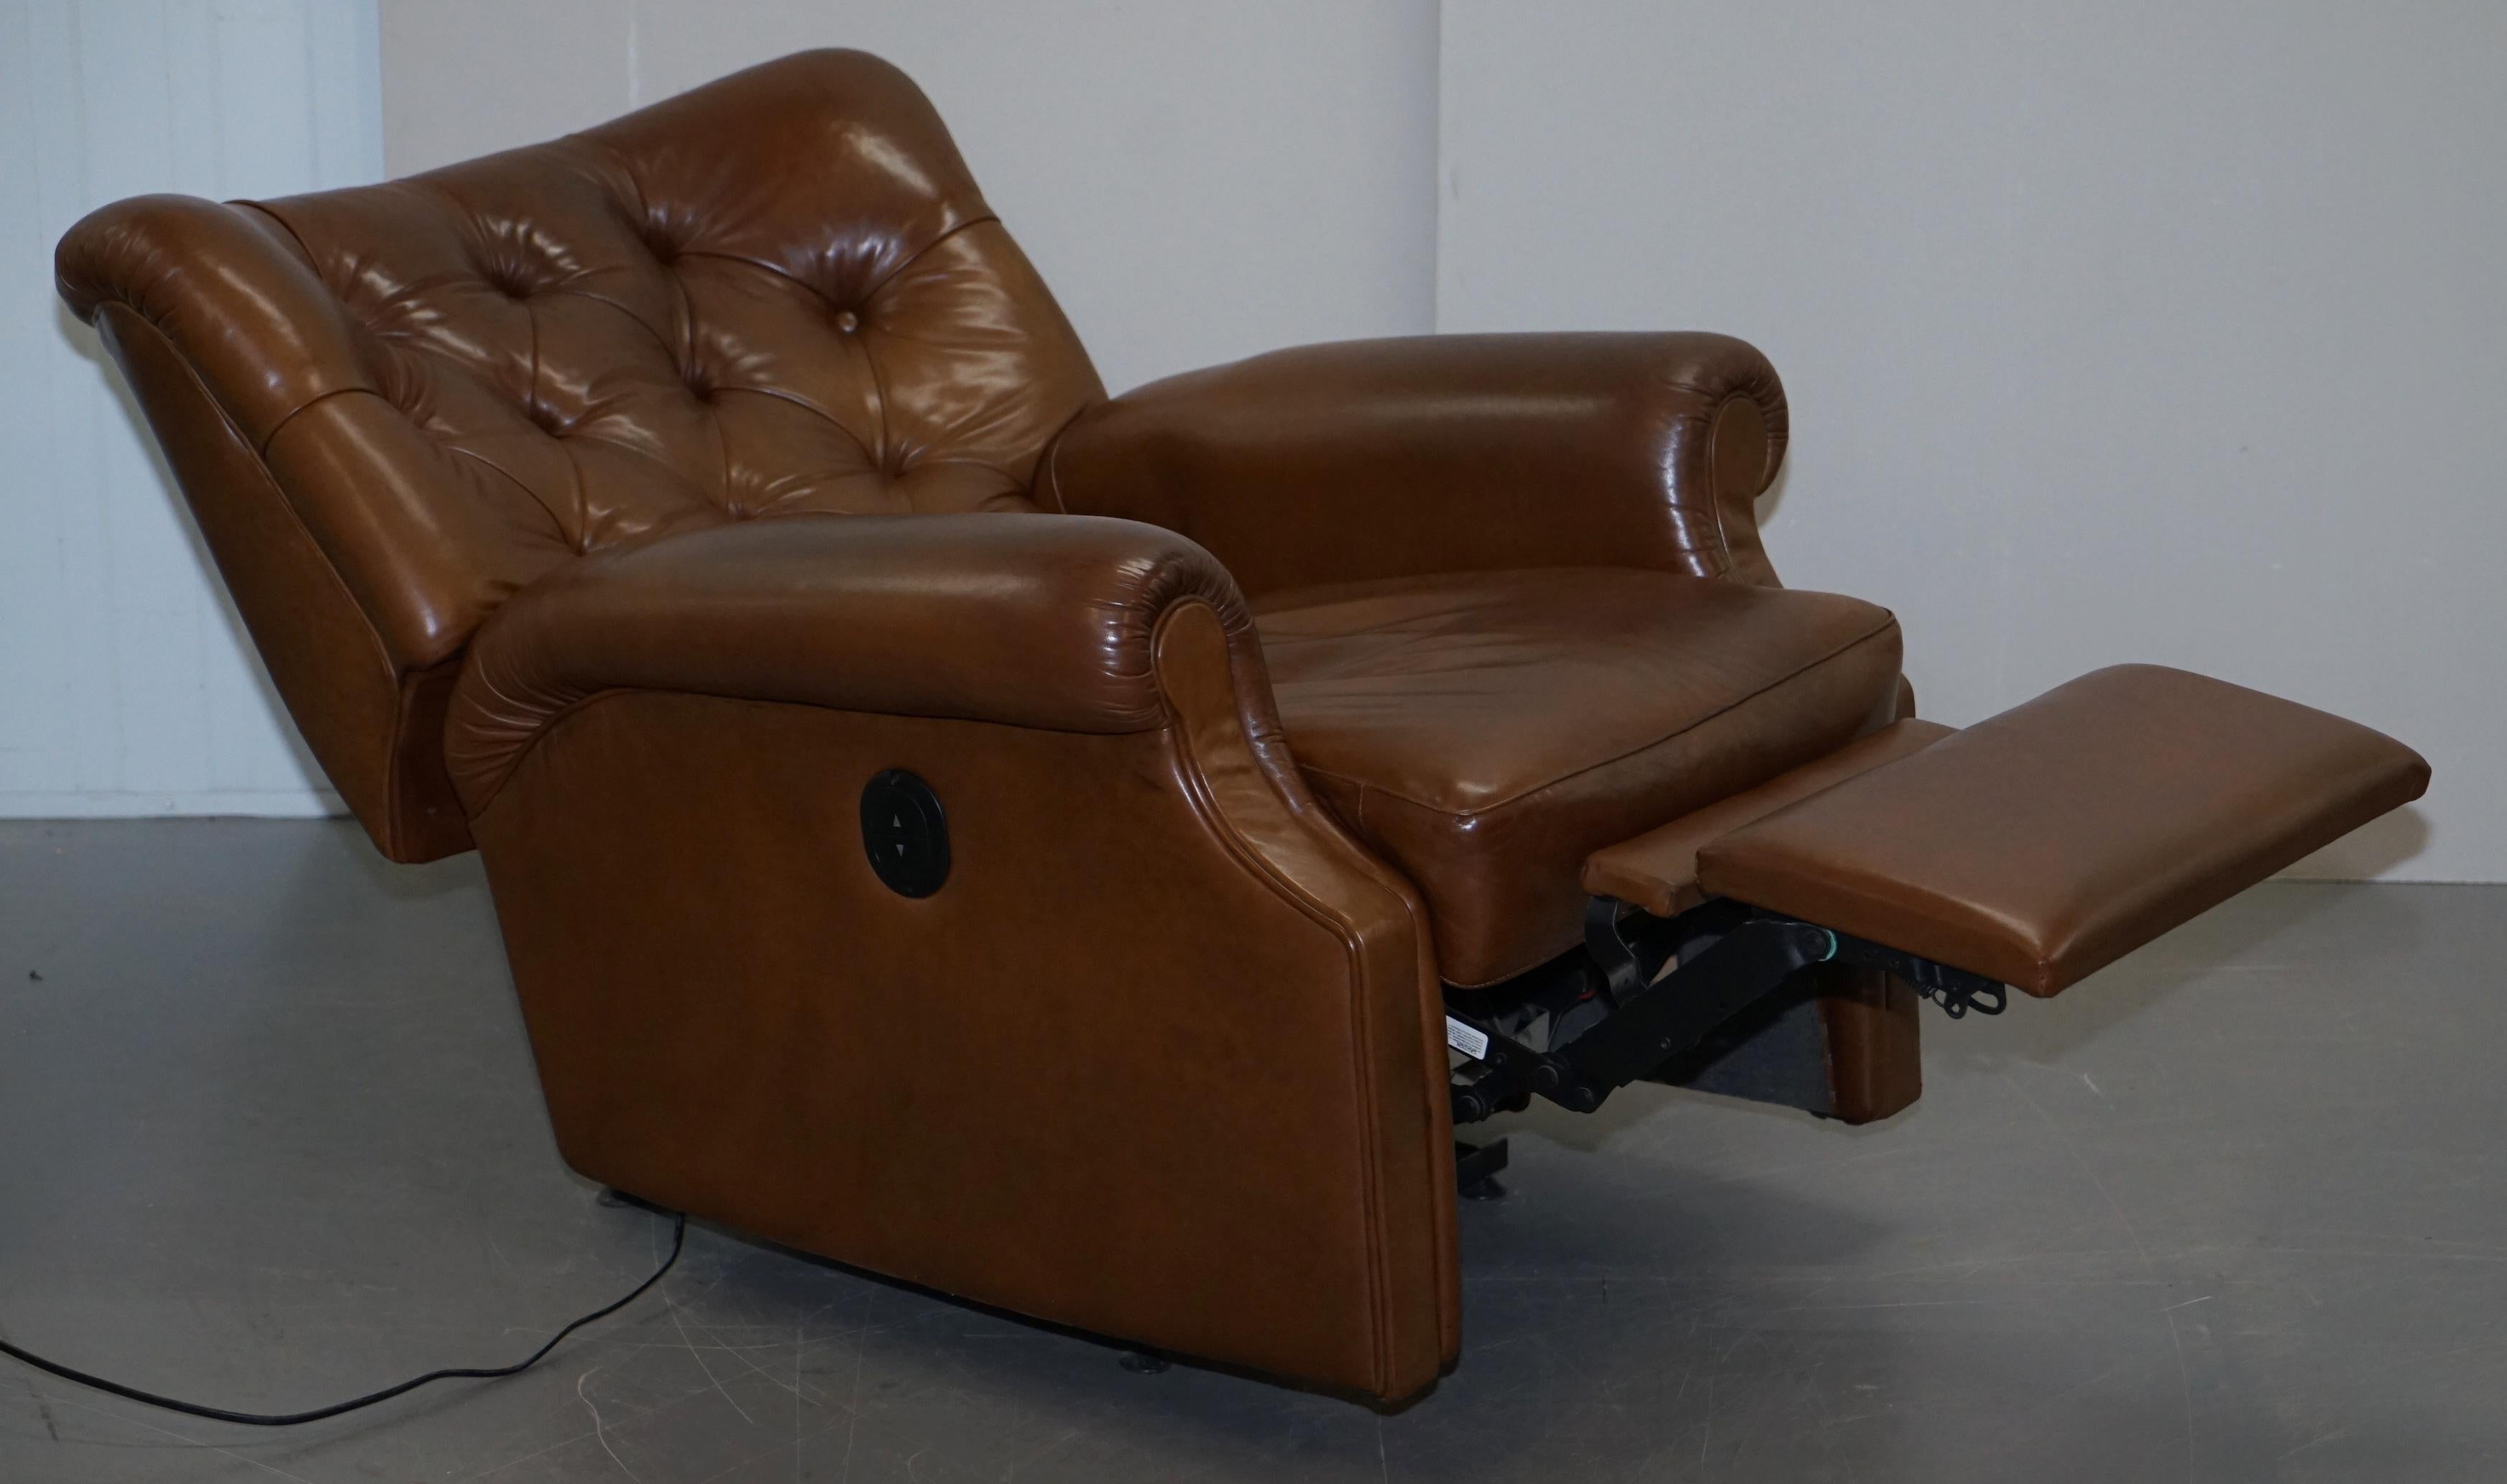 Lovely Tan Brown Leather Chesterfield Electric Relciner Armchair Comfortable!!!! 11